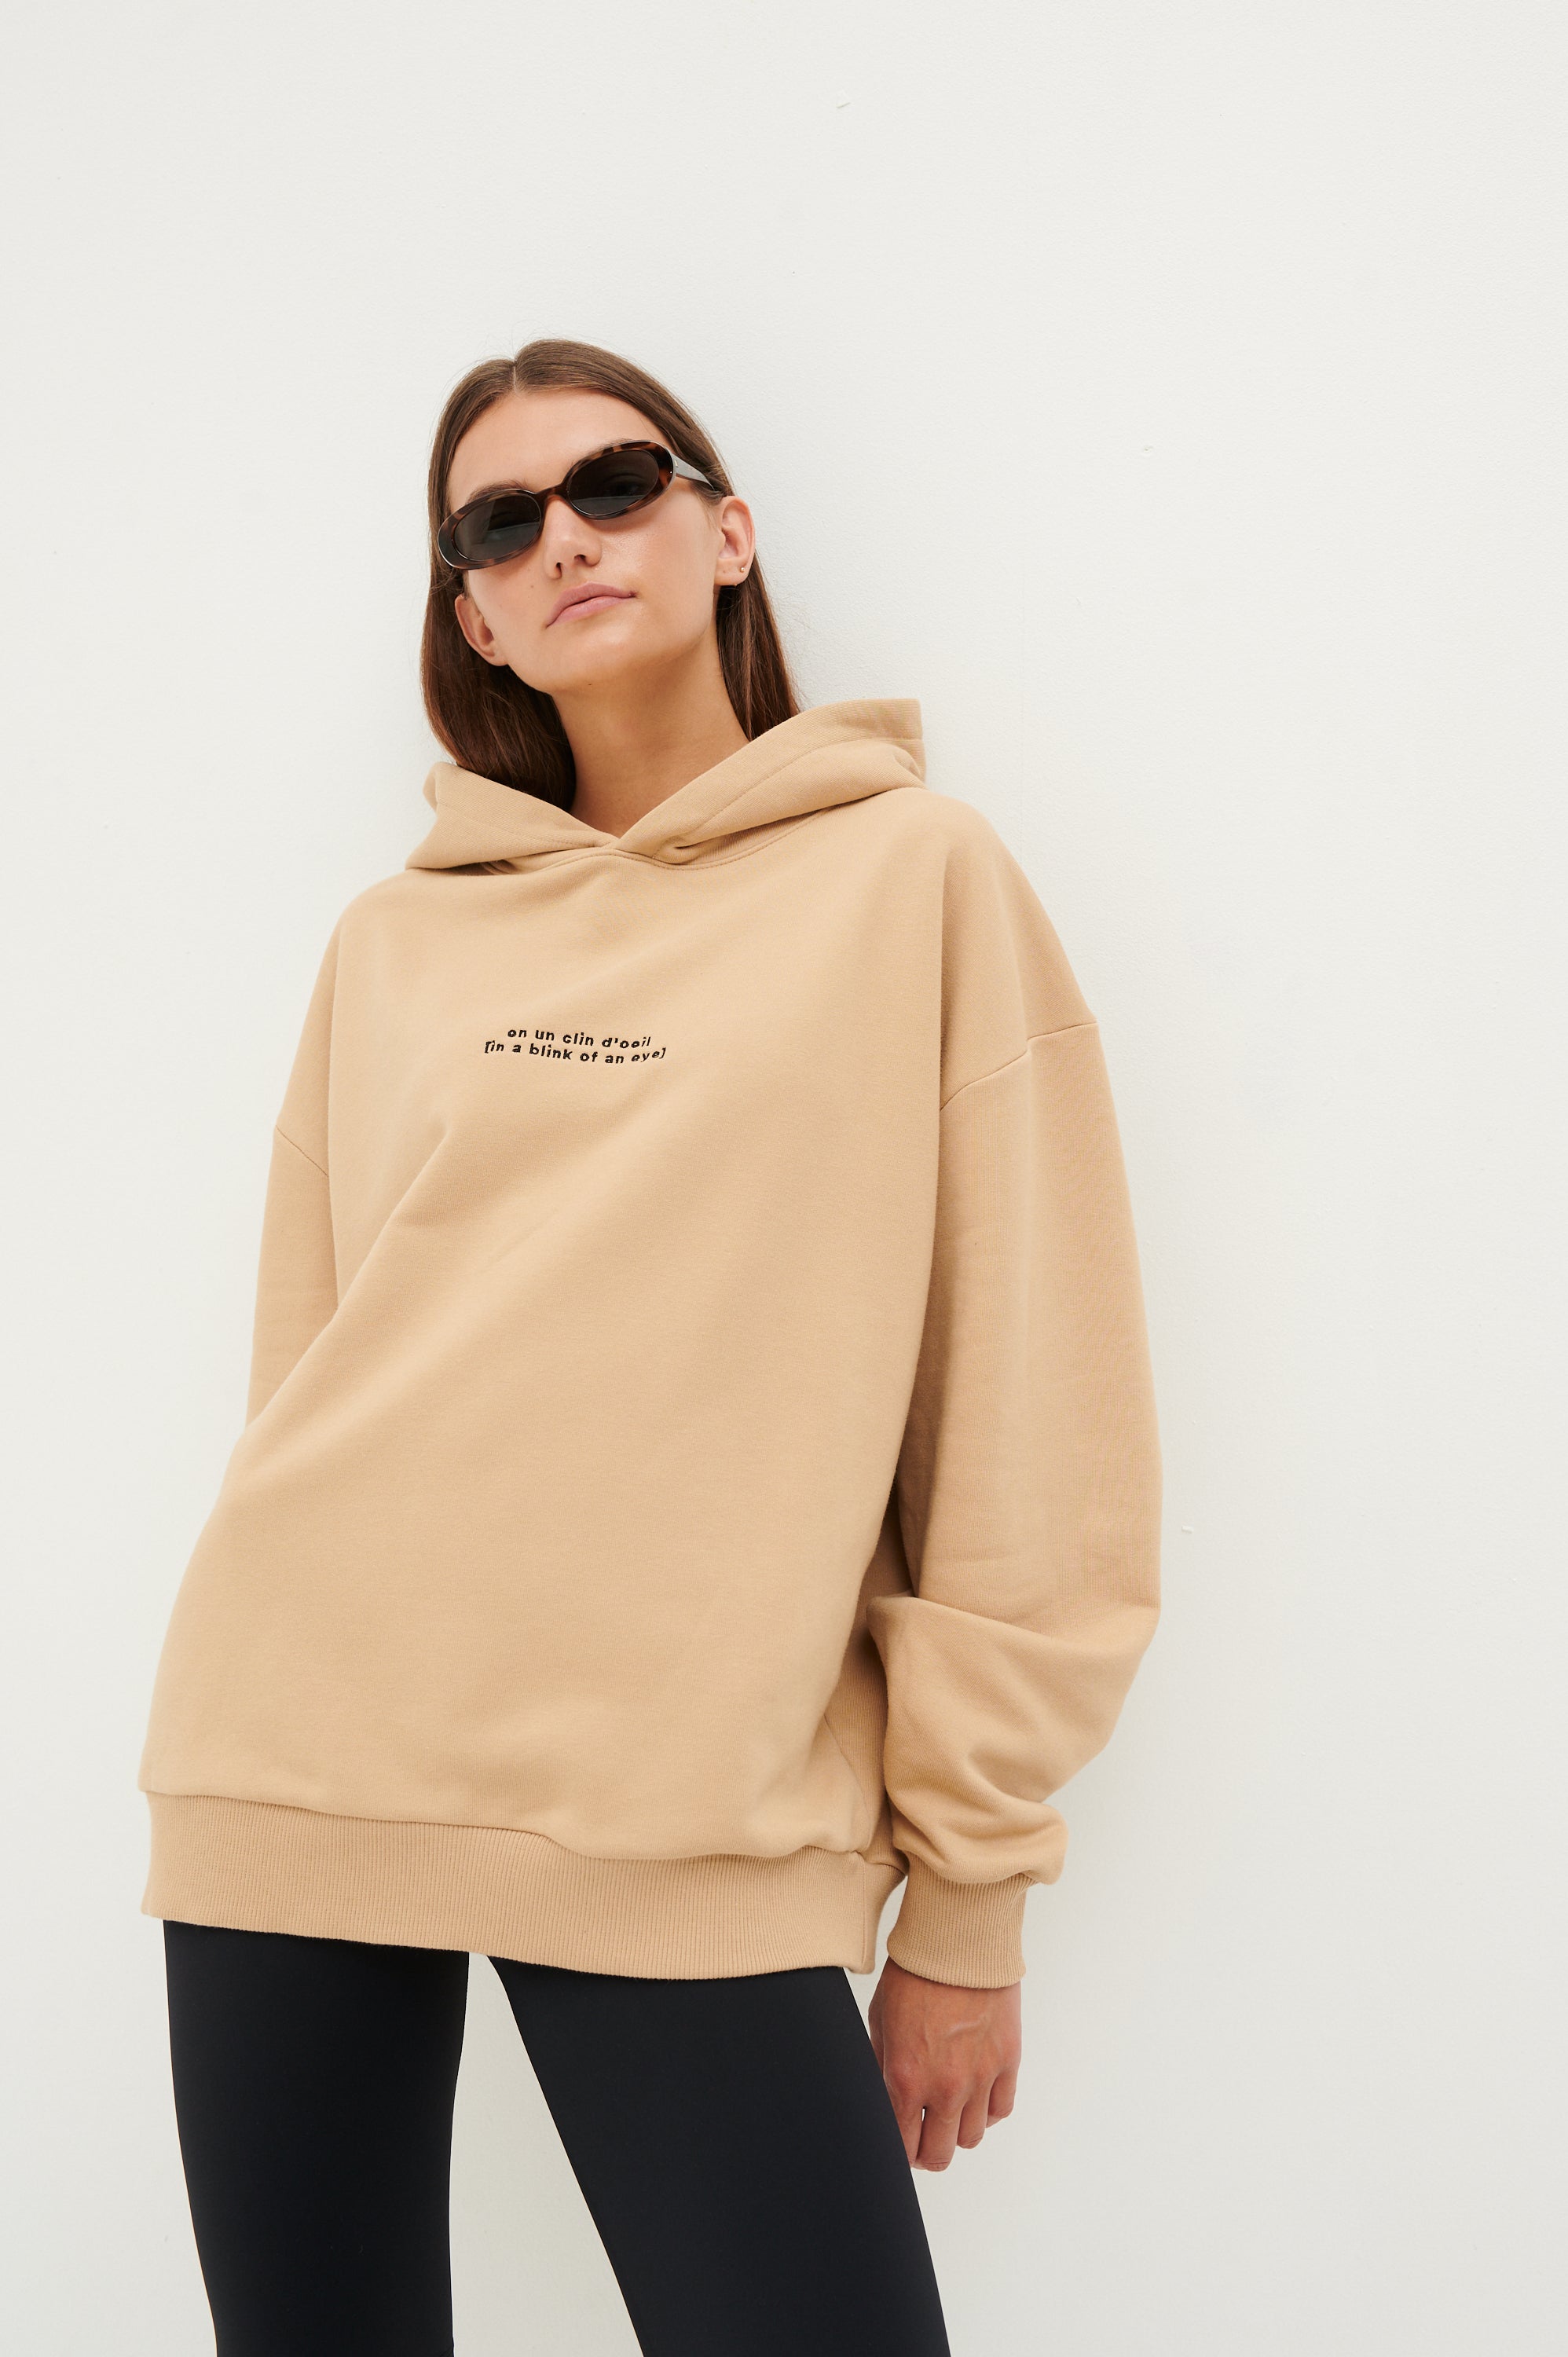 Le SLAP | FRENCH SERIES BLINK NUDE OVERSIZE HOODIE – Madress boutique